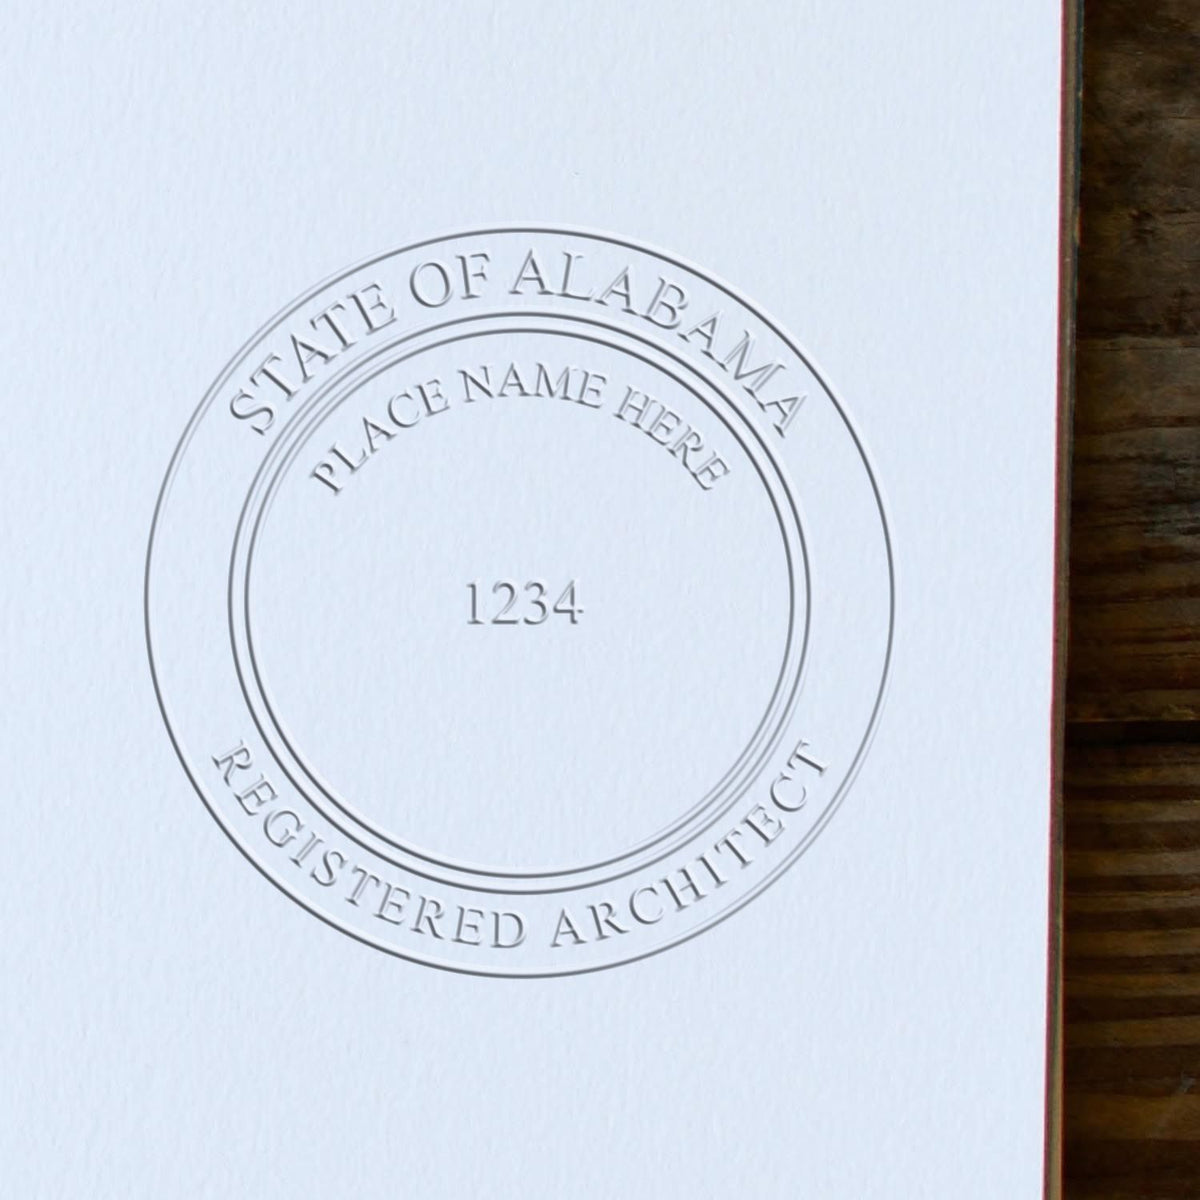 The State of Alabama Architectural Seal Embosser stamp impression comes to life with a crisp, detailed photo on paper - showcasing true professional quality.